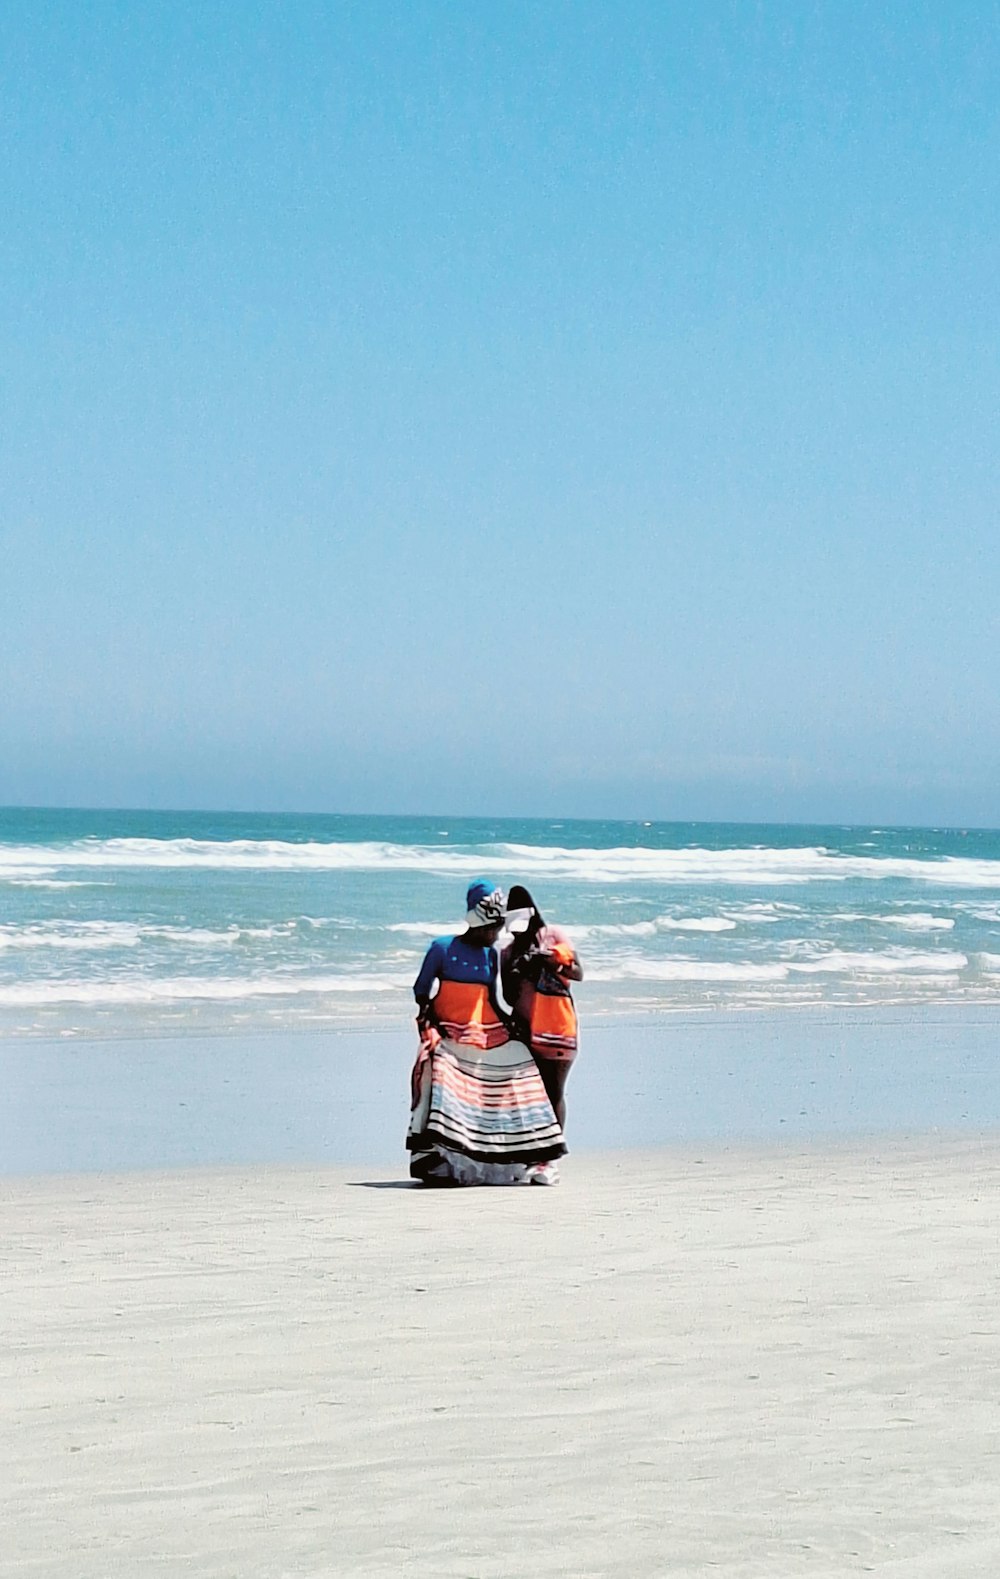 two people riding a motorcycle on the beach